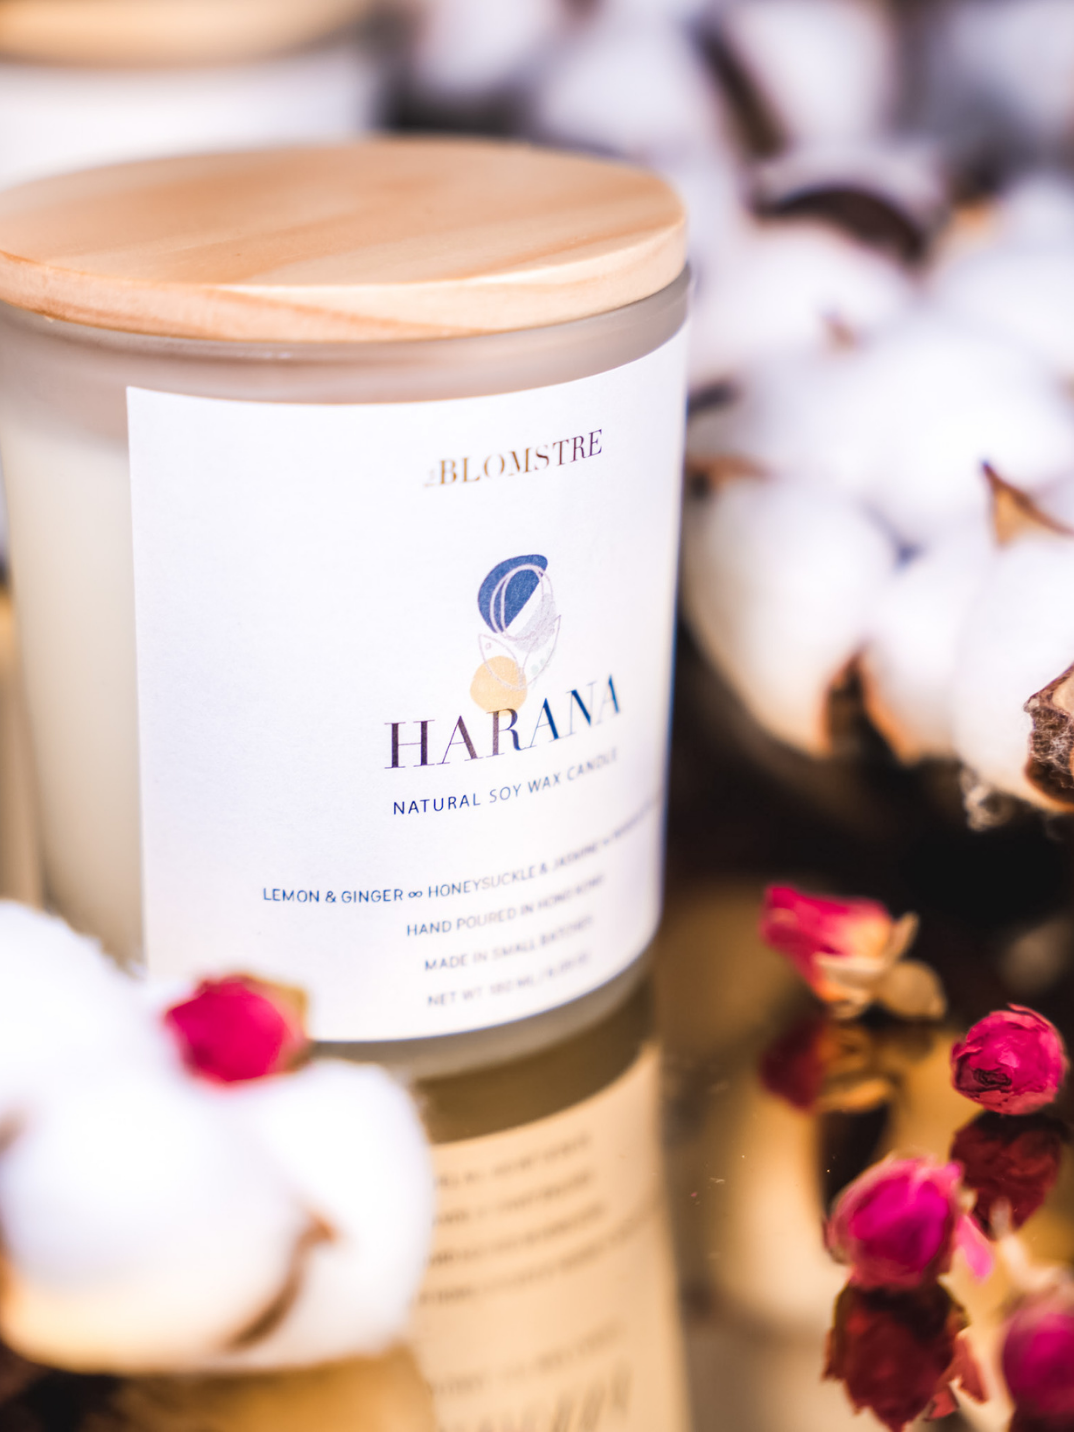 100% natural soy wax candle Harana scented with essential oils handpoured in small batches